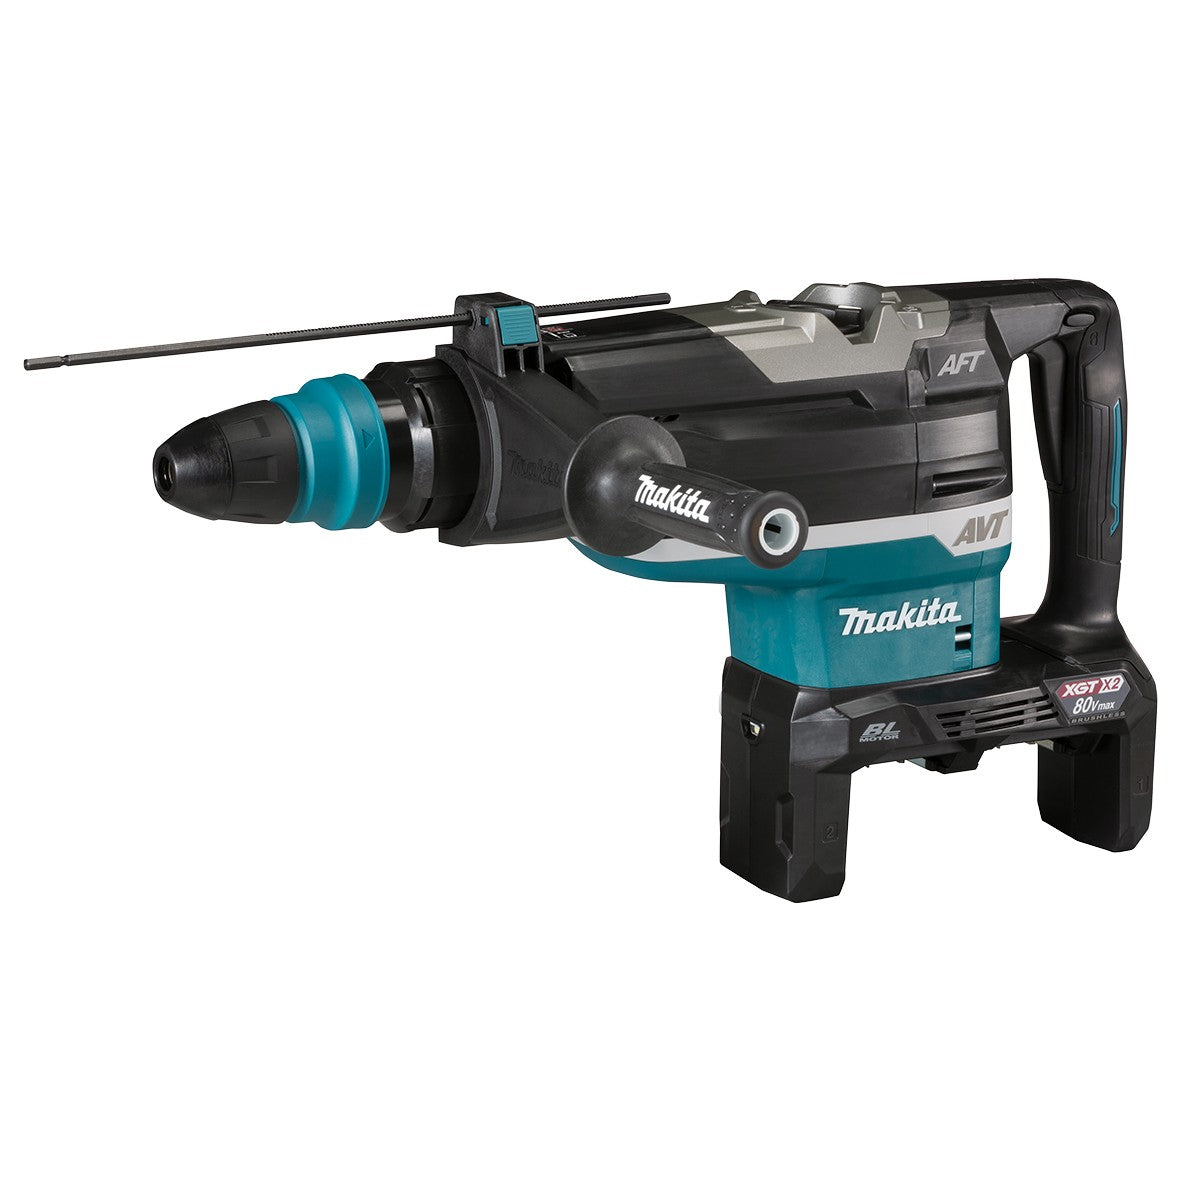 80V (40Vx2) 52mm Brushless SDS Max Rotary Hammer Bare (Tool Only) HR006GZ by Makita